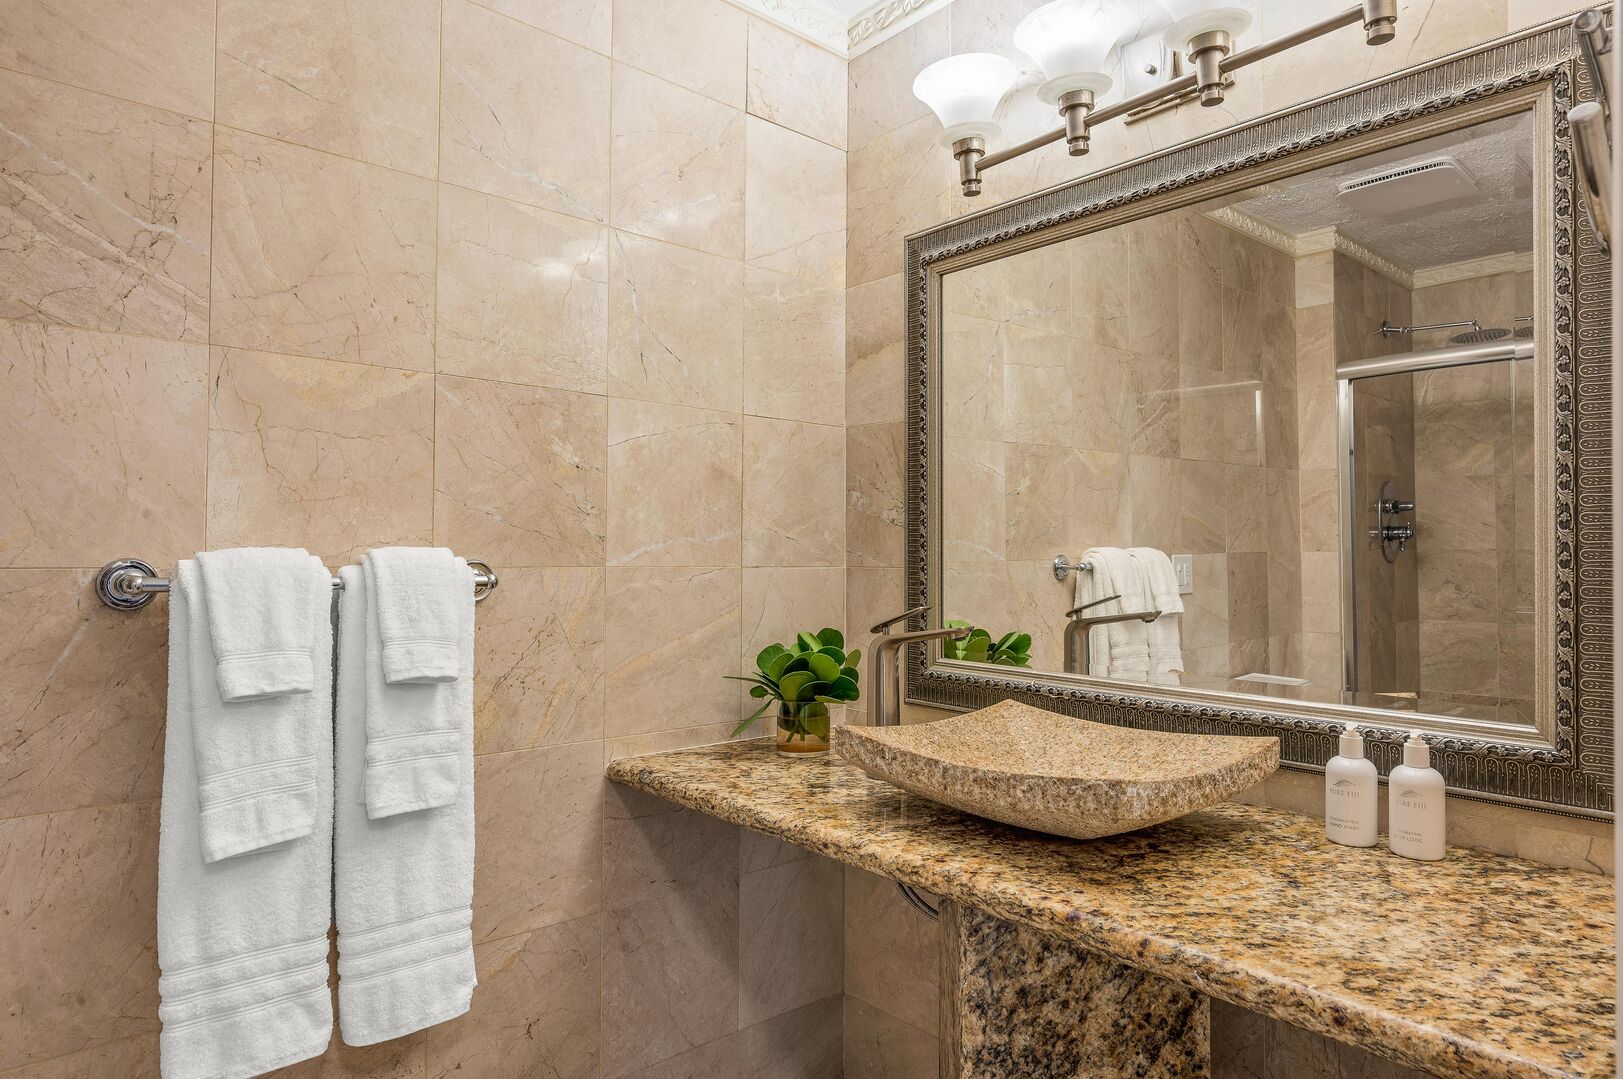 Downstairs you will find a full bathroom with spa like amenities.